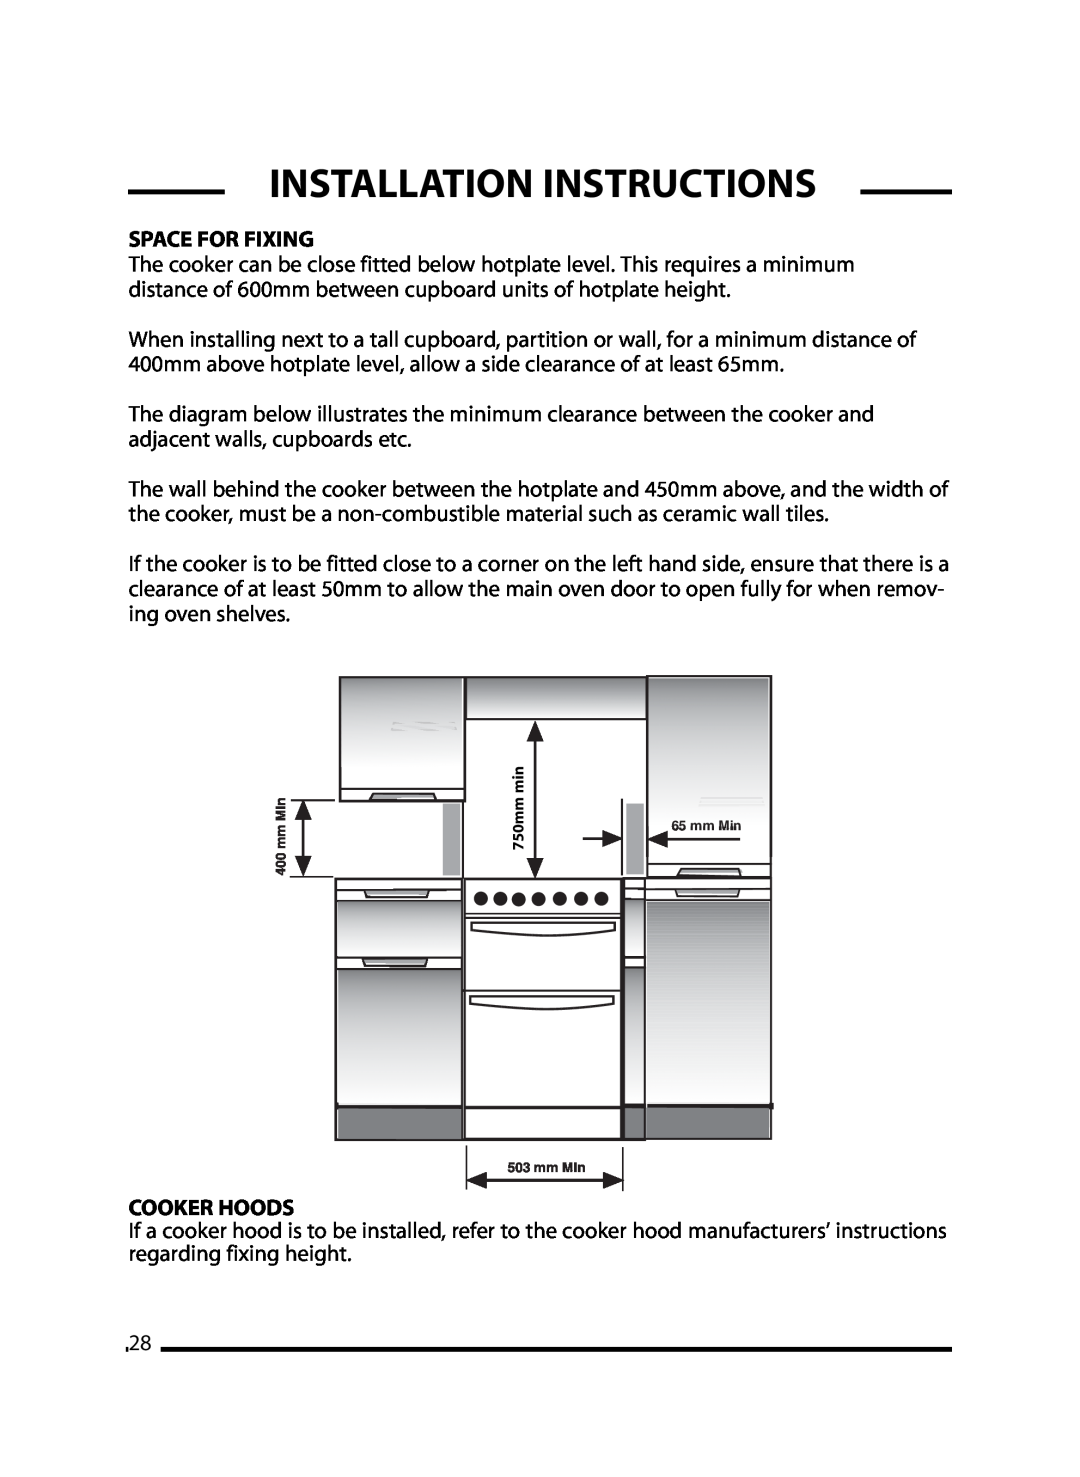 Cannon 10295G, 10297G Mk2, 10296G manual Space For Fixing, Cooker Hoods, Installation Instructions, 750mm 